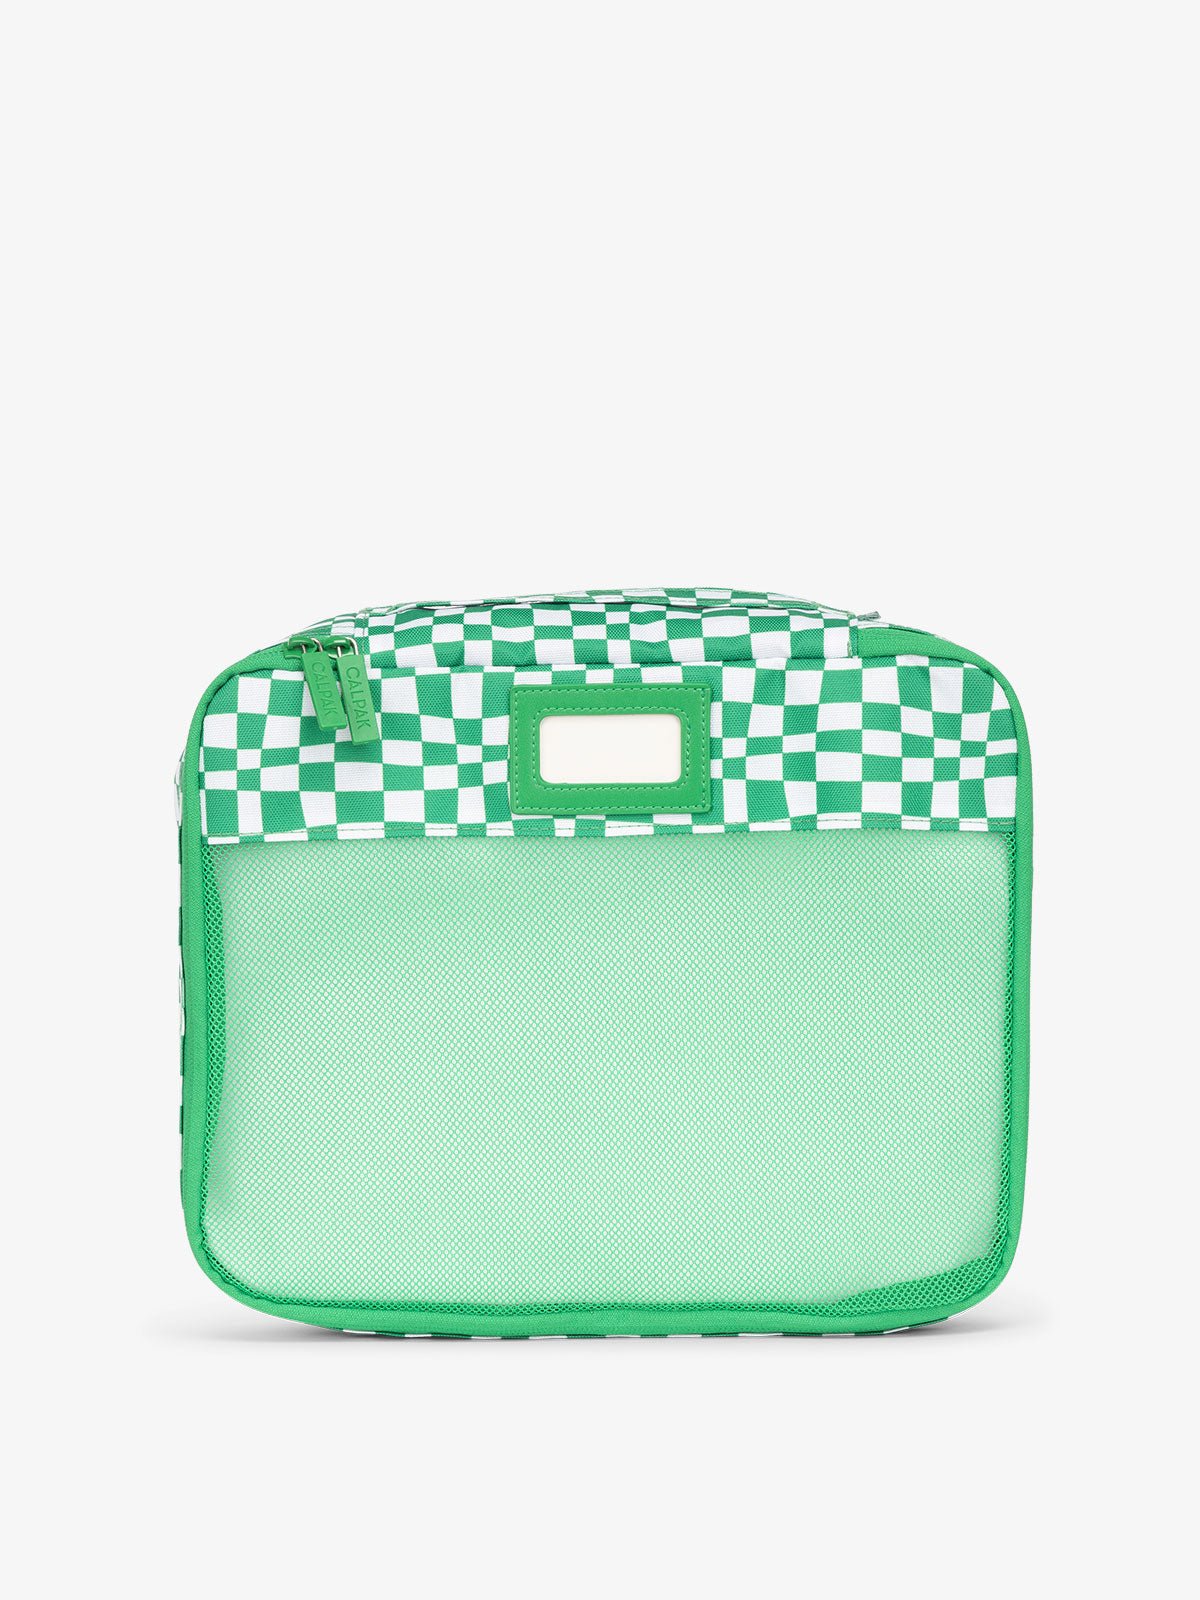 CALPAK luggage packing cubes for clothes with mesh front and label in green checkerboard